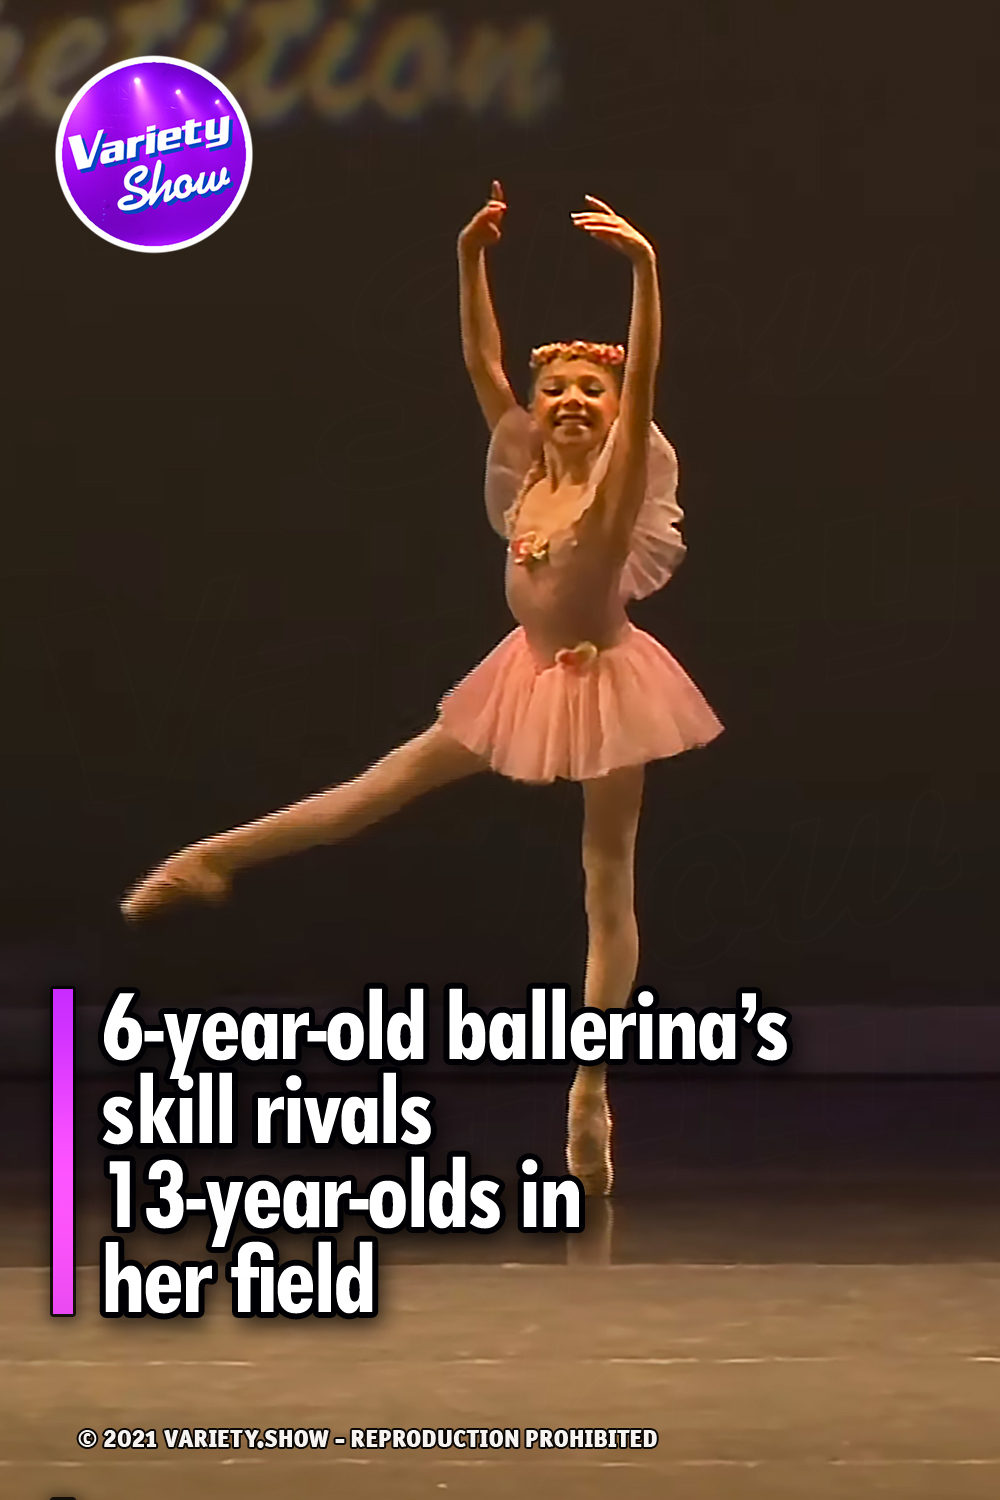 6-year-old ballerina’s skill rivals 13-year-olds in her field